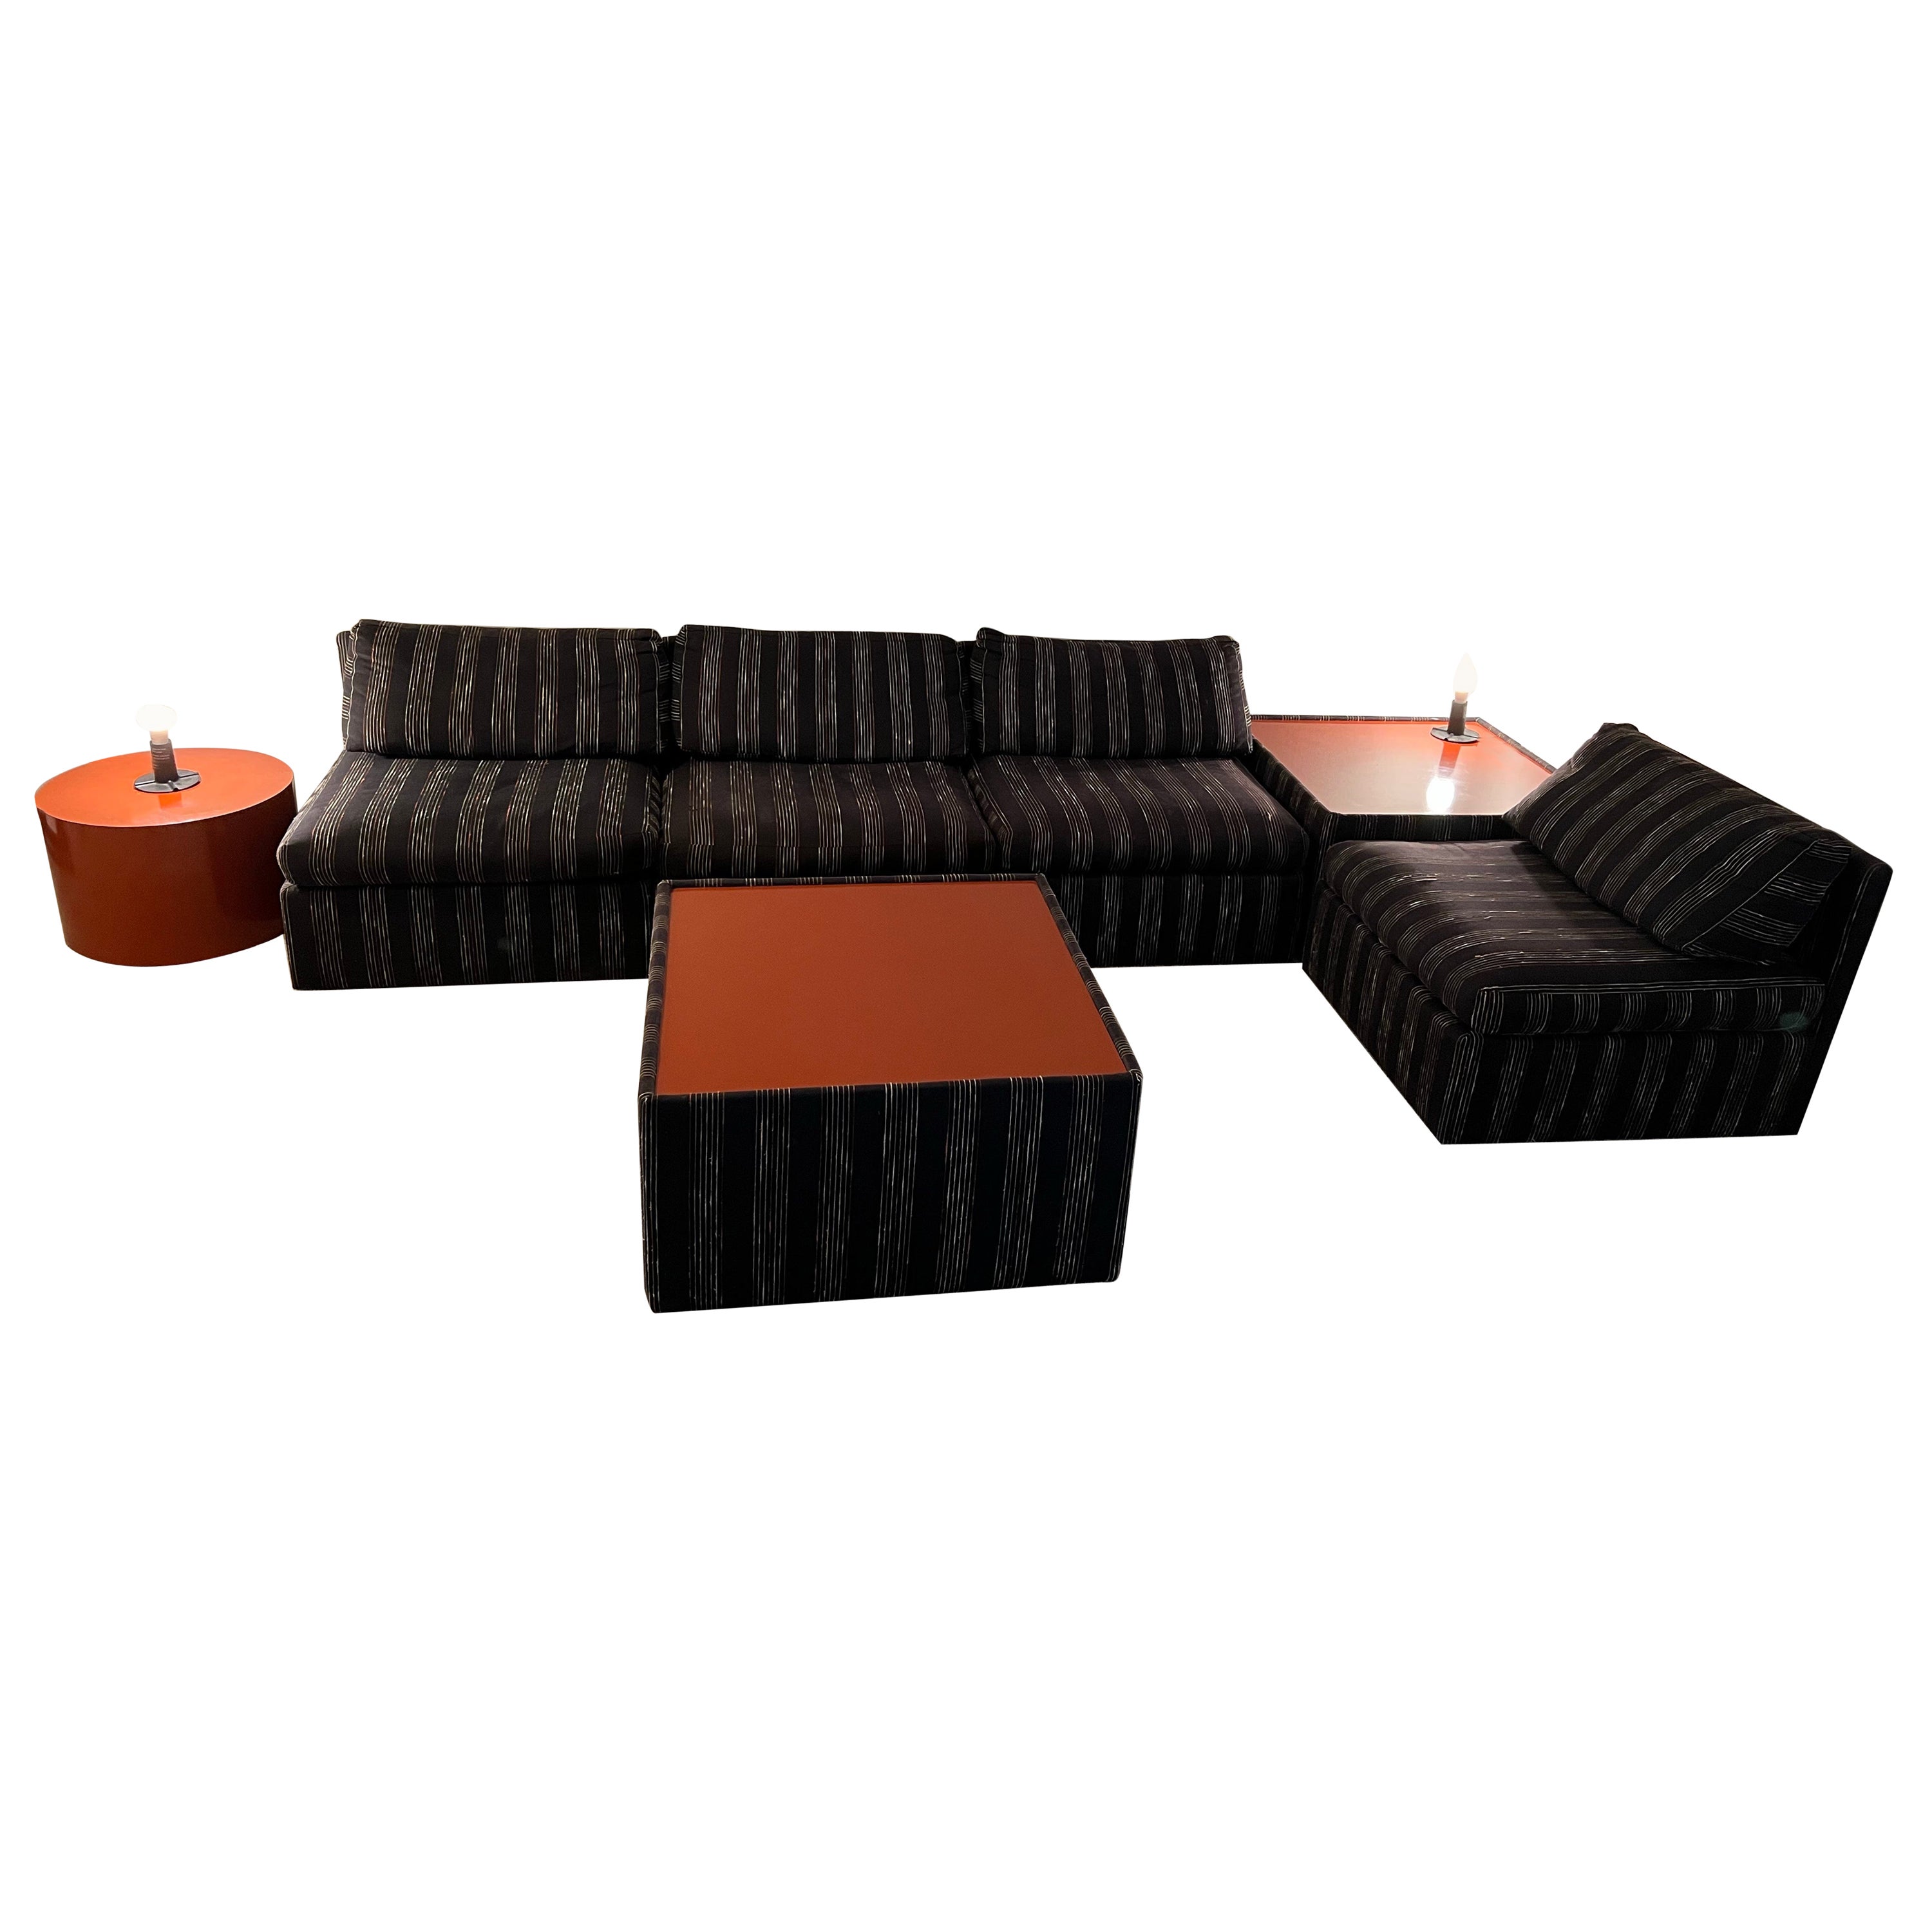 Stunning 6 Piece Milo Baughman Sectional Pit Group by Thayer Coggin circa 1980